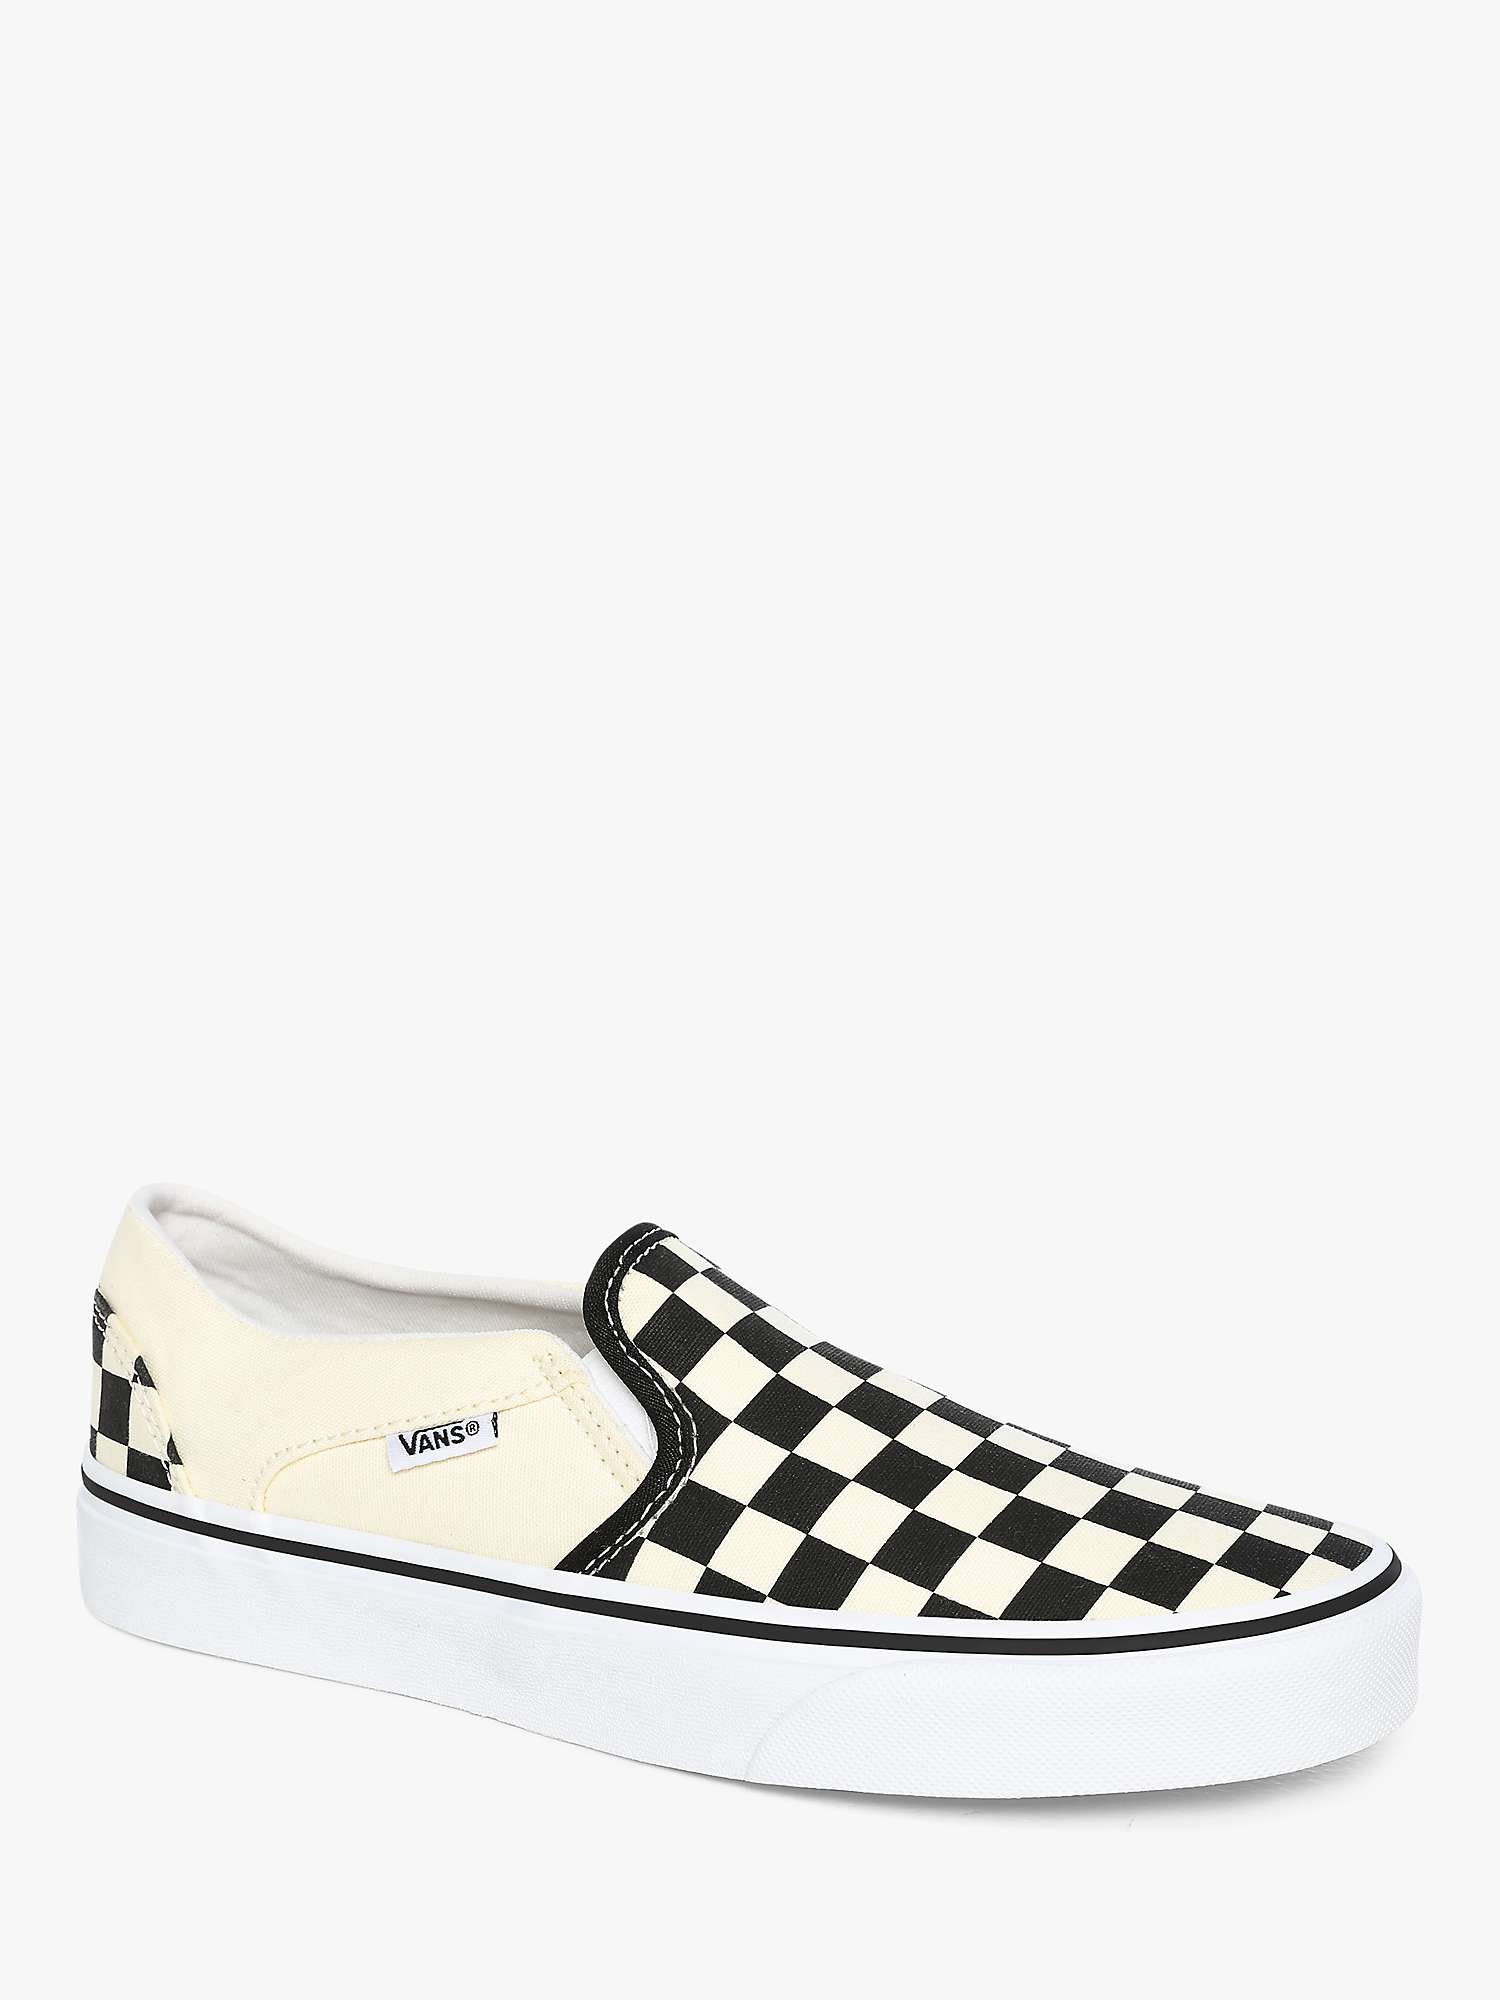 Vans Asher Checkerboard Slip-On Trainers, Black/White at John Lewis &  Partners